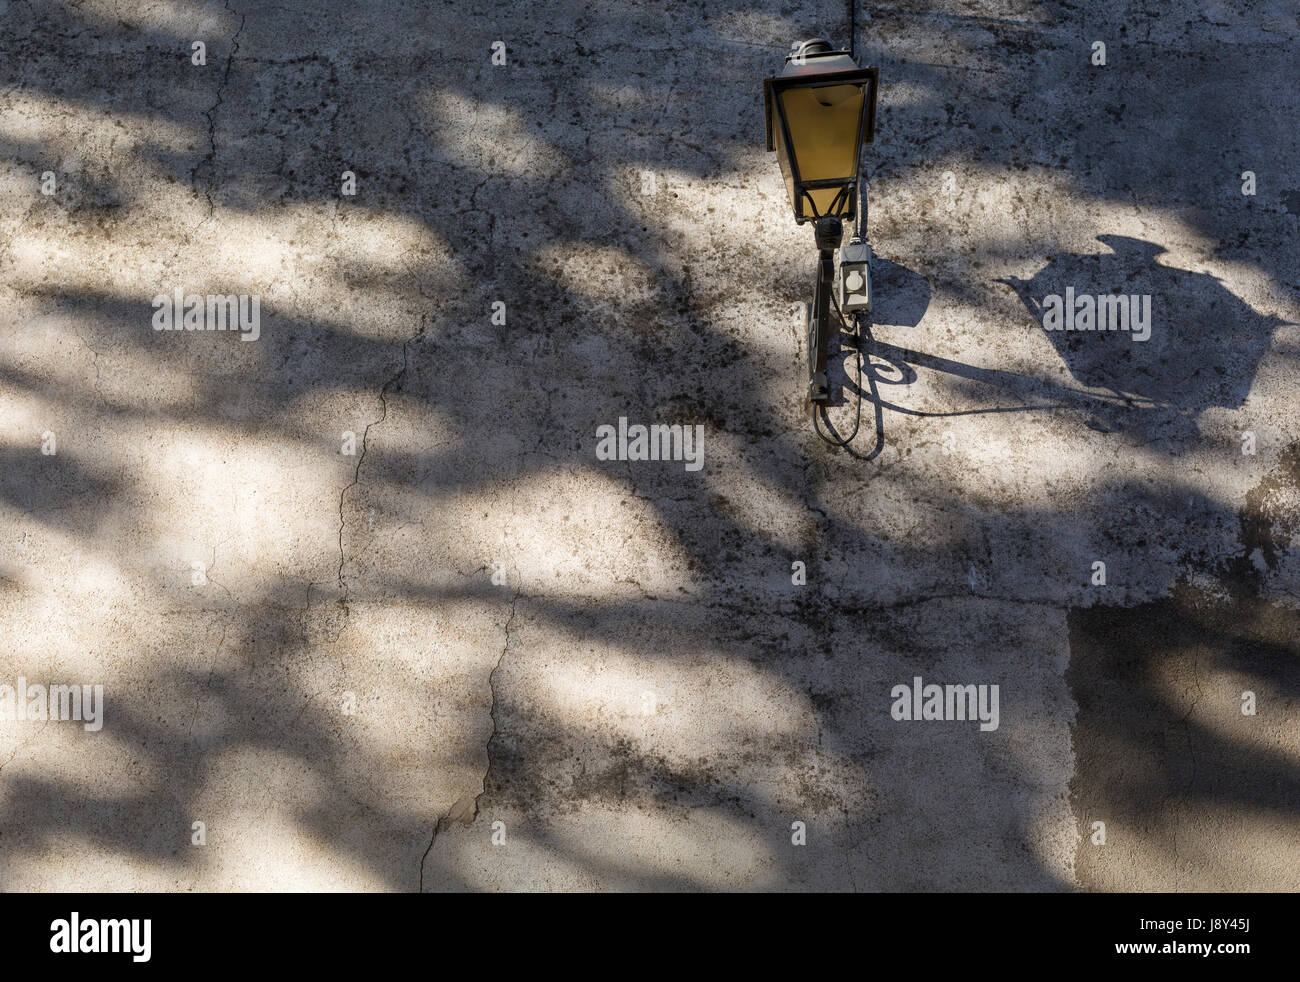 Shadow patterns and a street lamp on a wall on 25th May, 2017, in Lagrasse, Languedoc-Rousillon, south of France. Lagrasse is listed as one of France's most beautiful villages and lies on the famous Route 20 wine route in the Basses-Corbieres region dating to the 13th century. Stock Photo